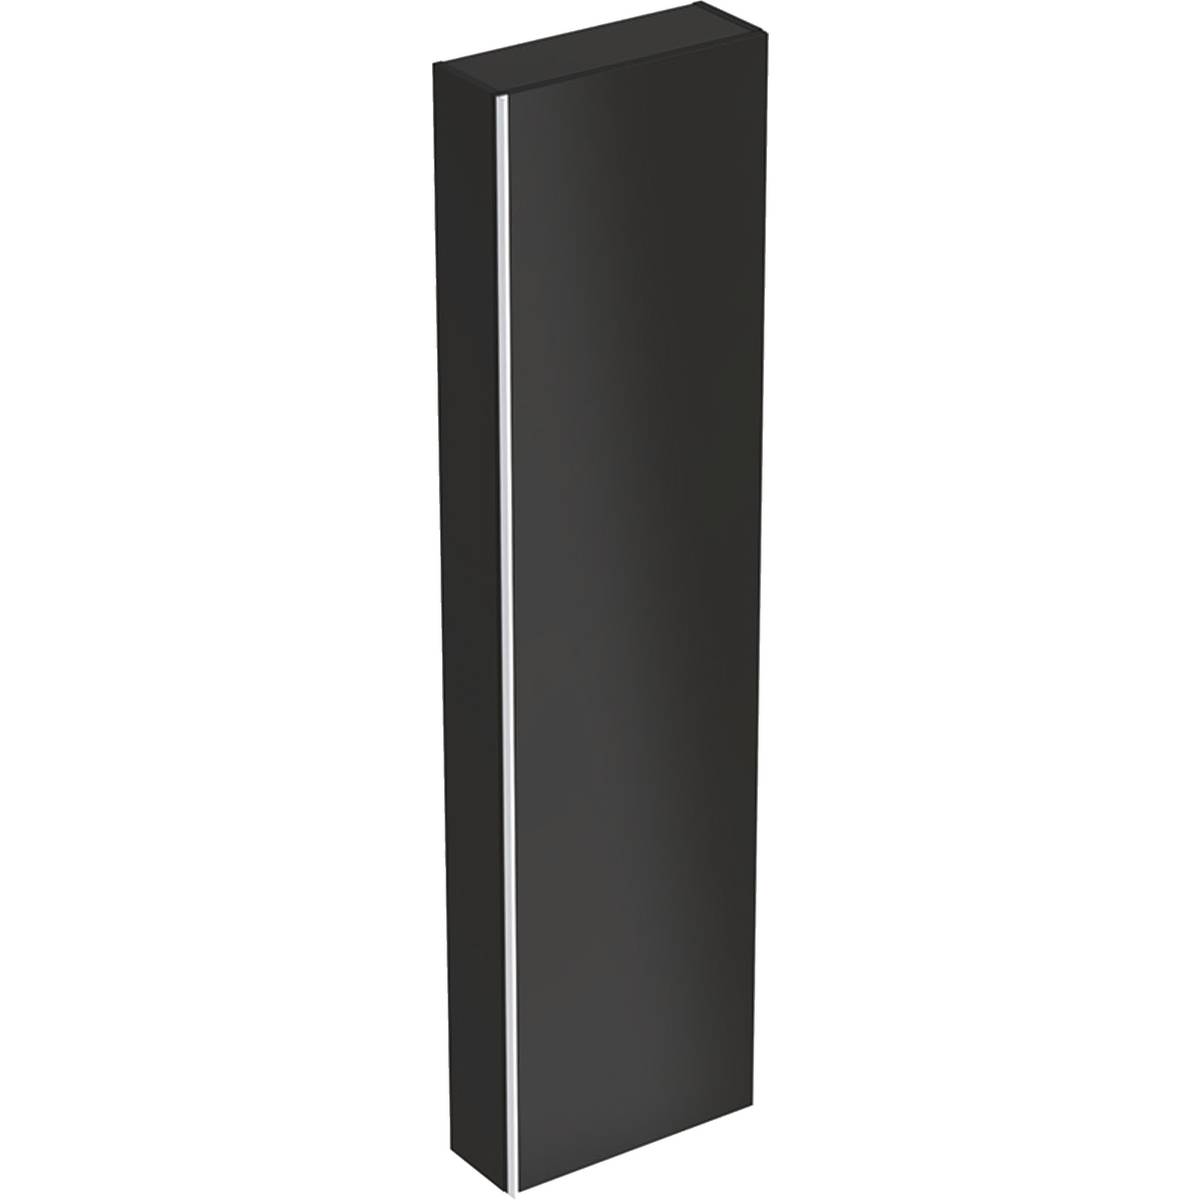 Acanto Tall Cabinet with One Door